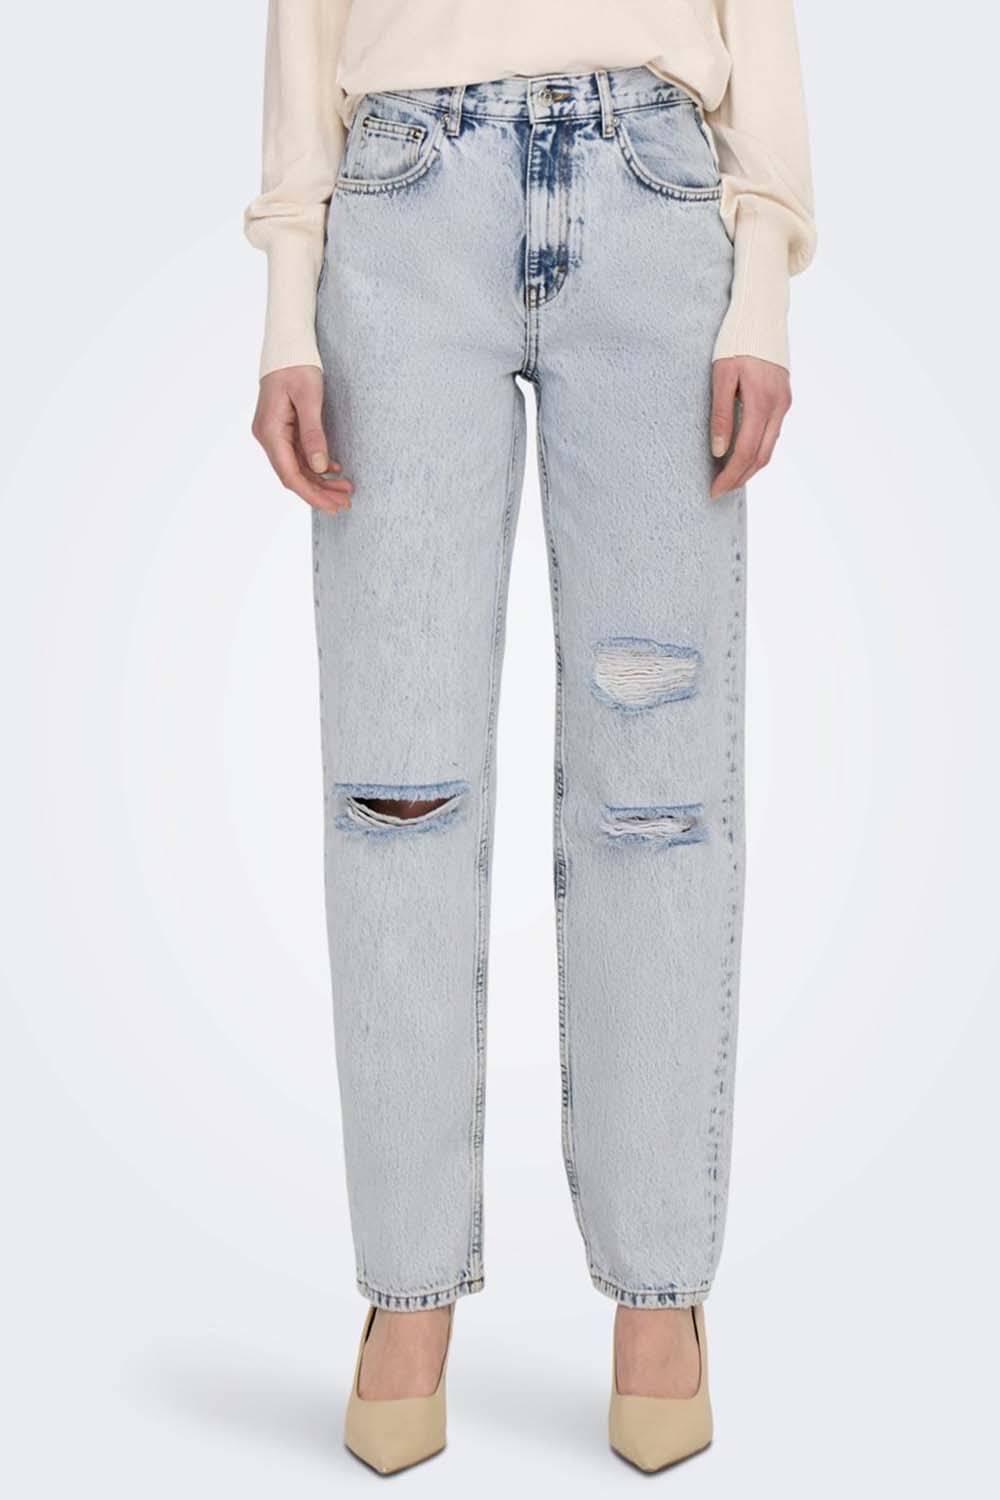 Only Robyn Jeans - Hyper Shops